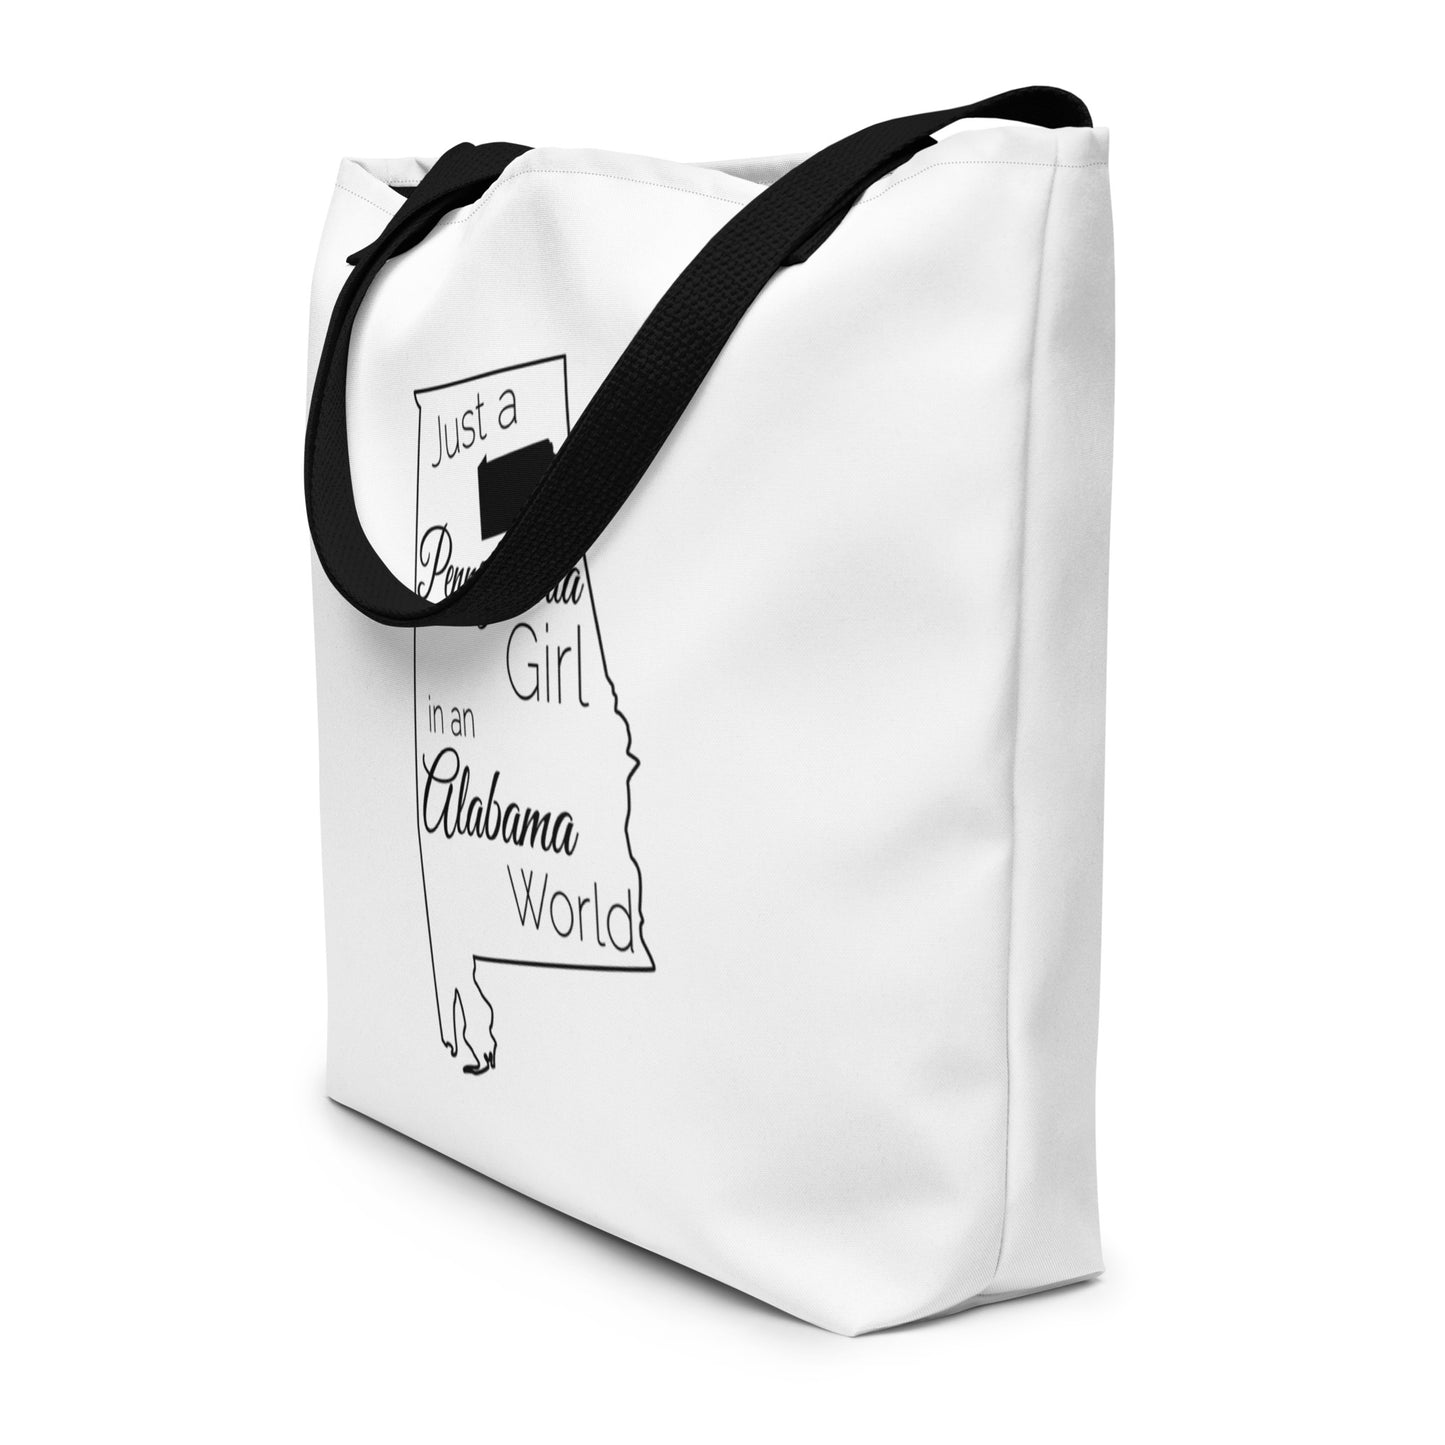 Just a Pennsylvania Girl in an Alabama World Large Tote Bag